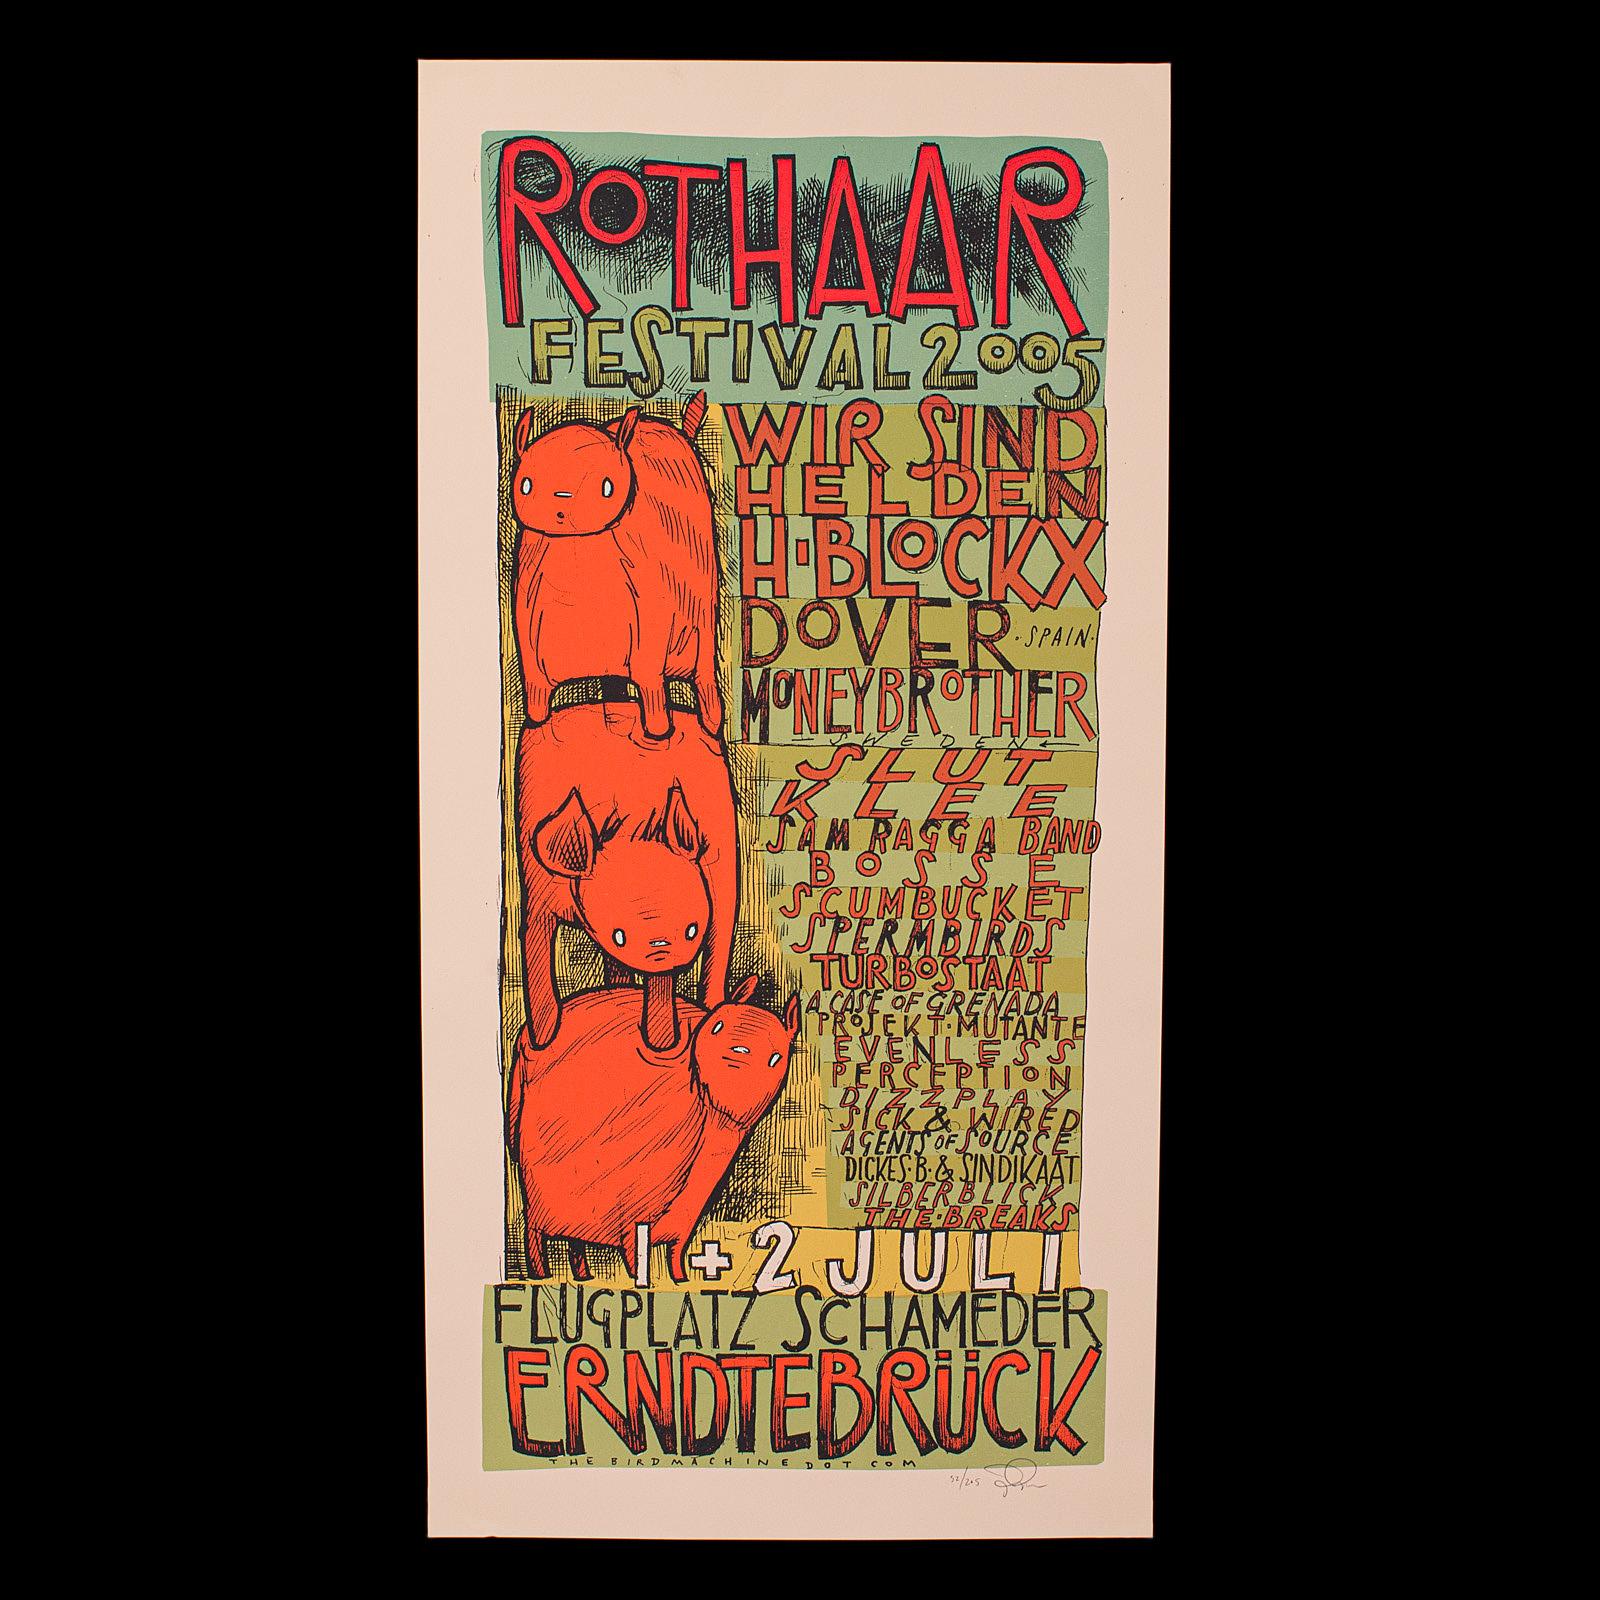 This is a decorative concert screenprint. An American, art poster for the Rothaar Festival signed by the artist, dated to 2005.

Distinctive art poster for the Rothaar Festival in Germany
Displays gallery exhibition quality and in good original